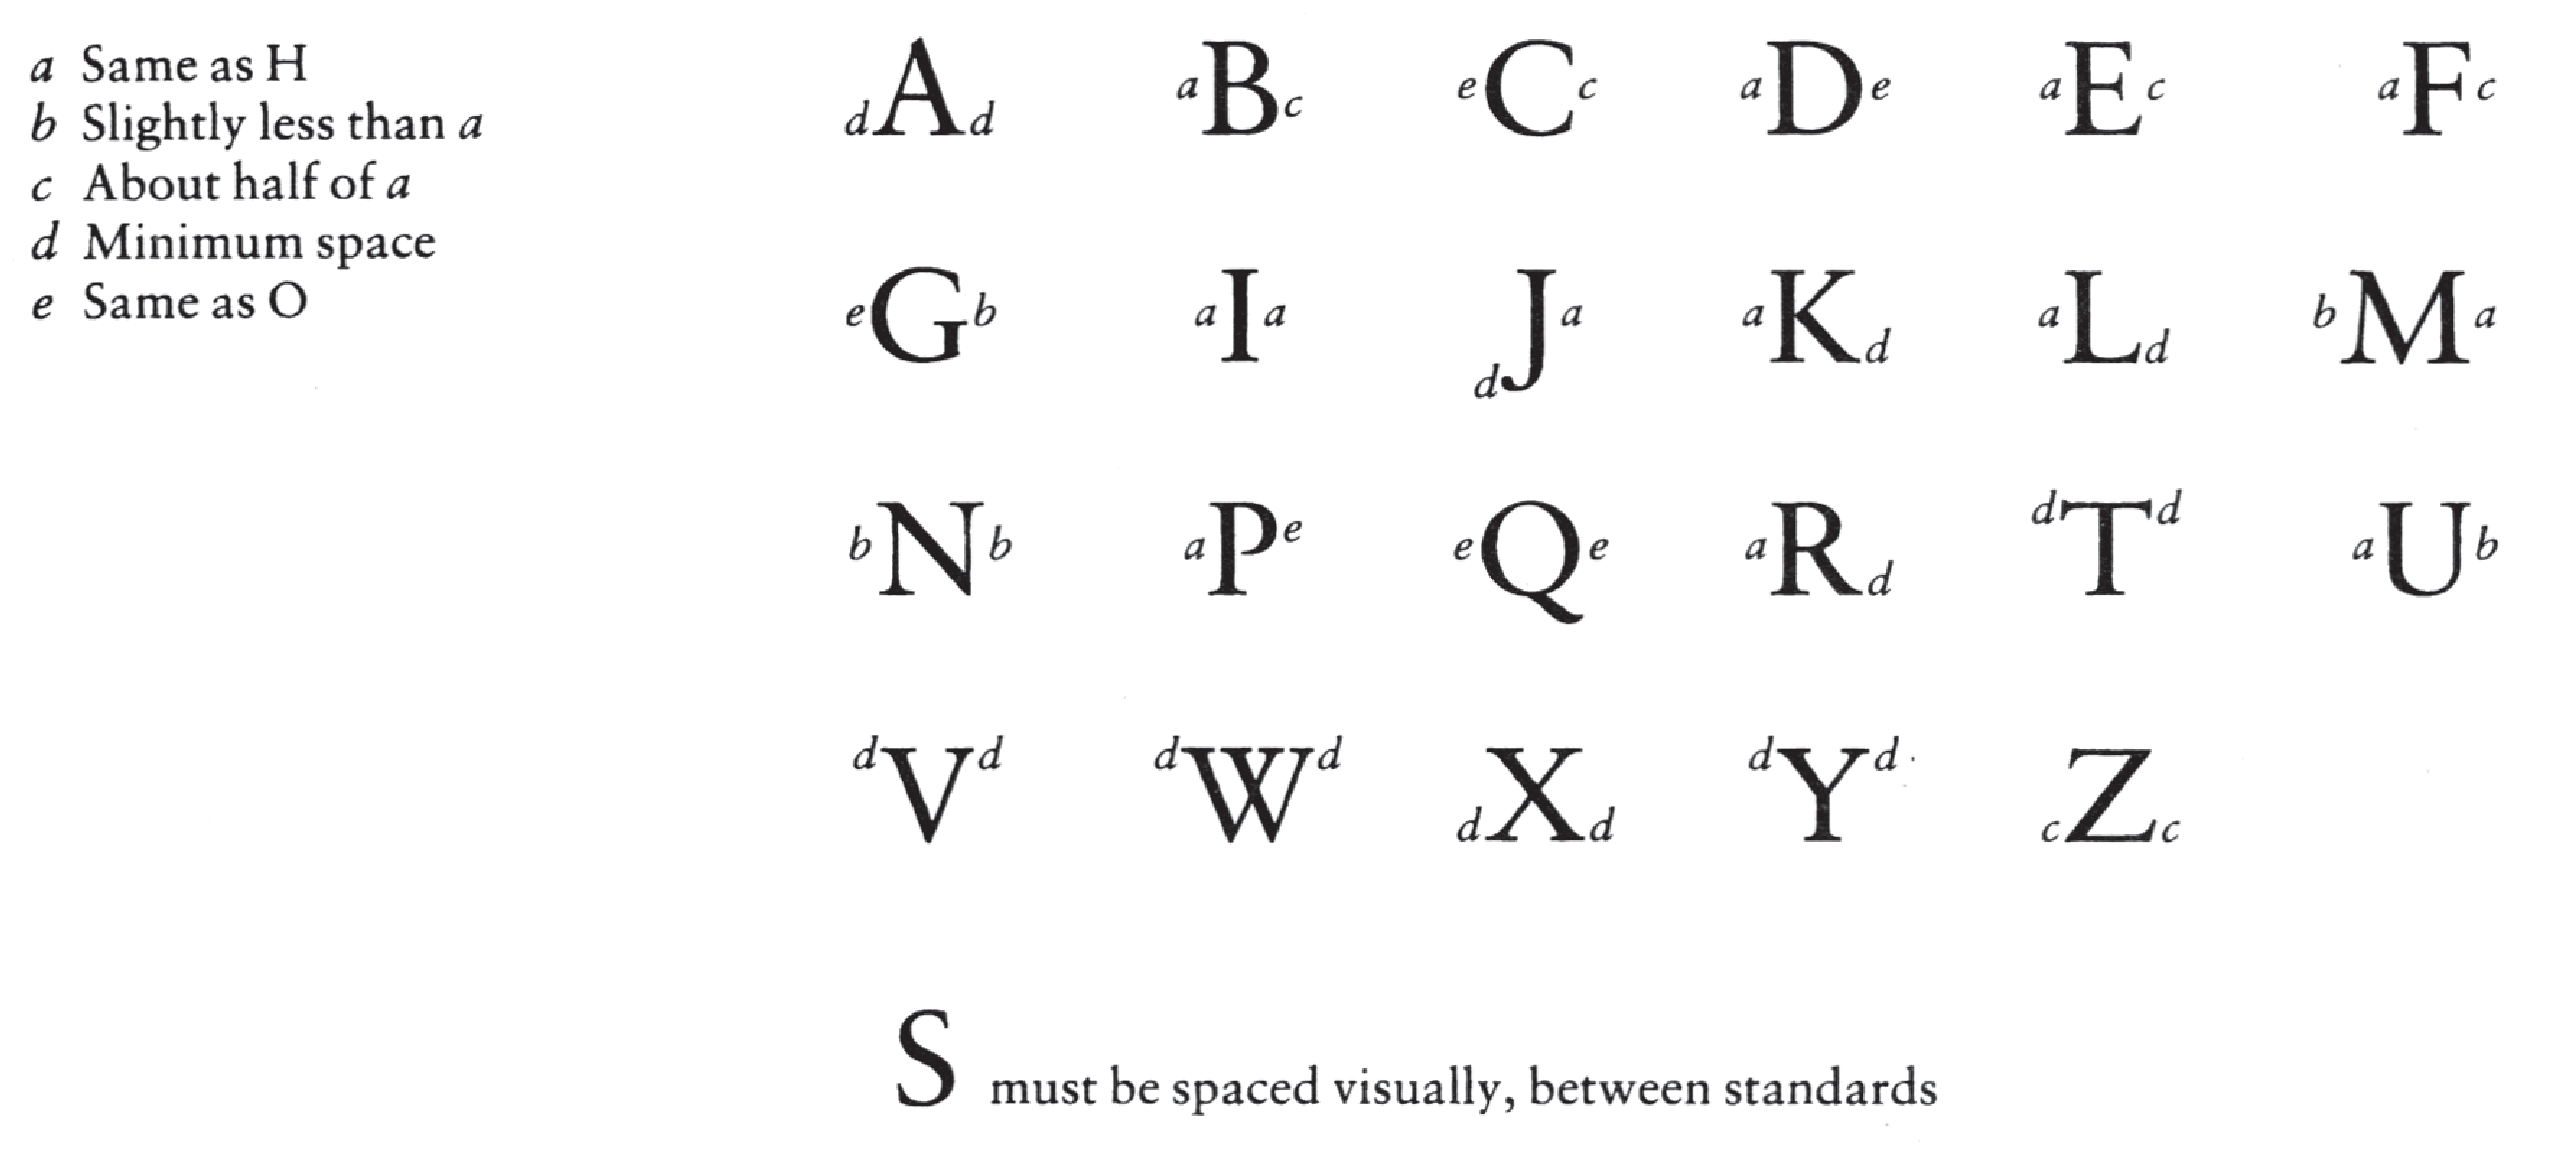 Walter Tracy's Spacing Chart